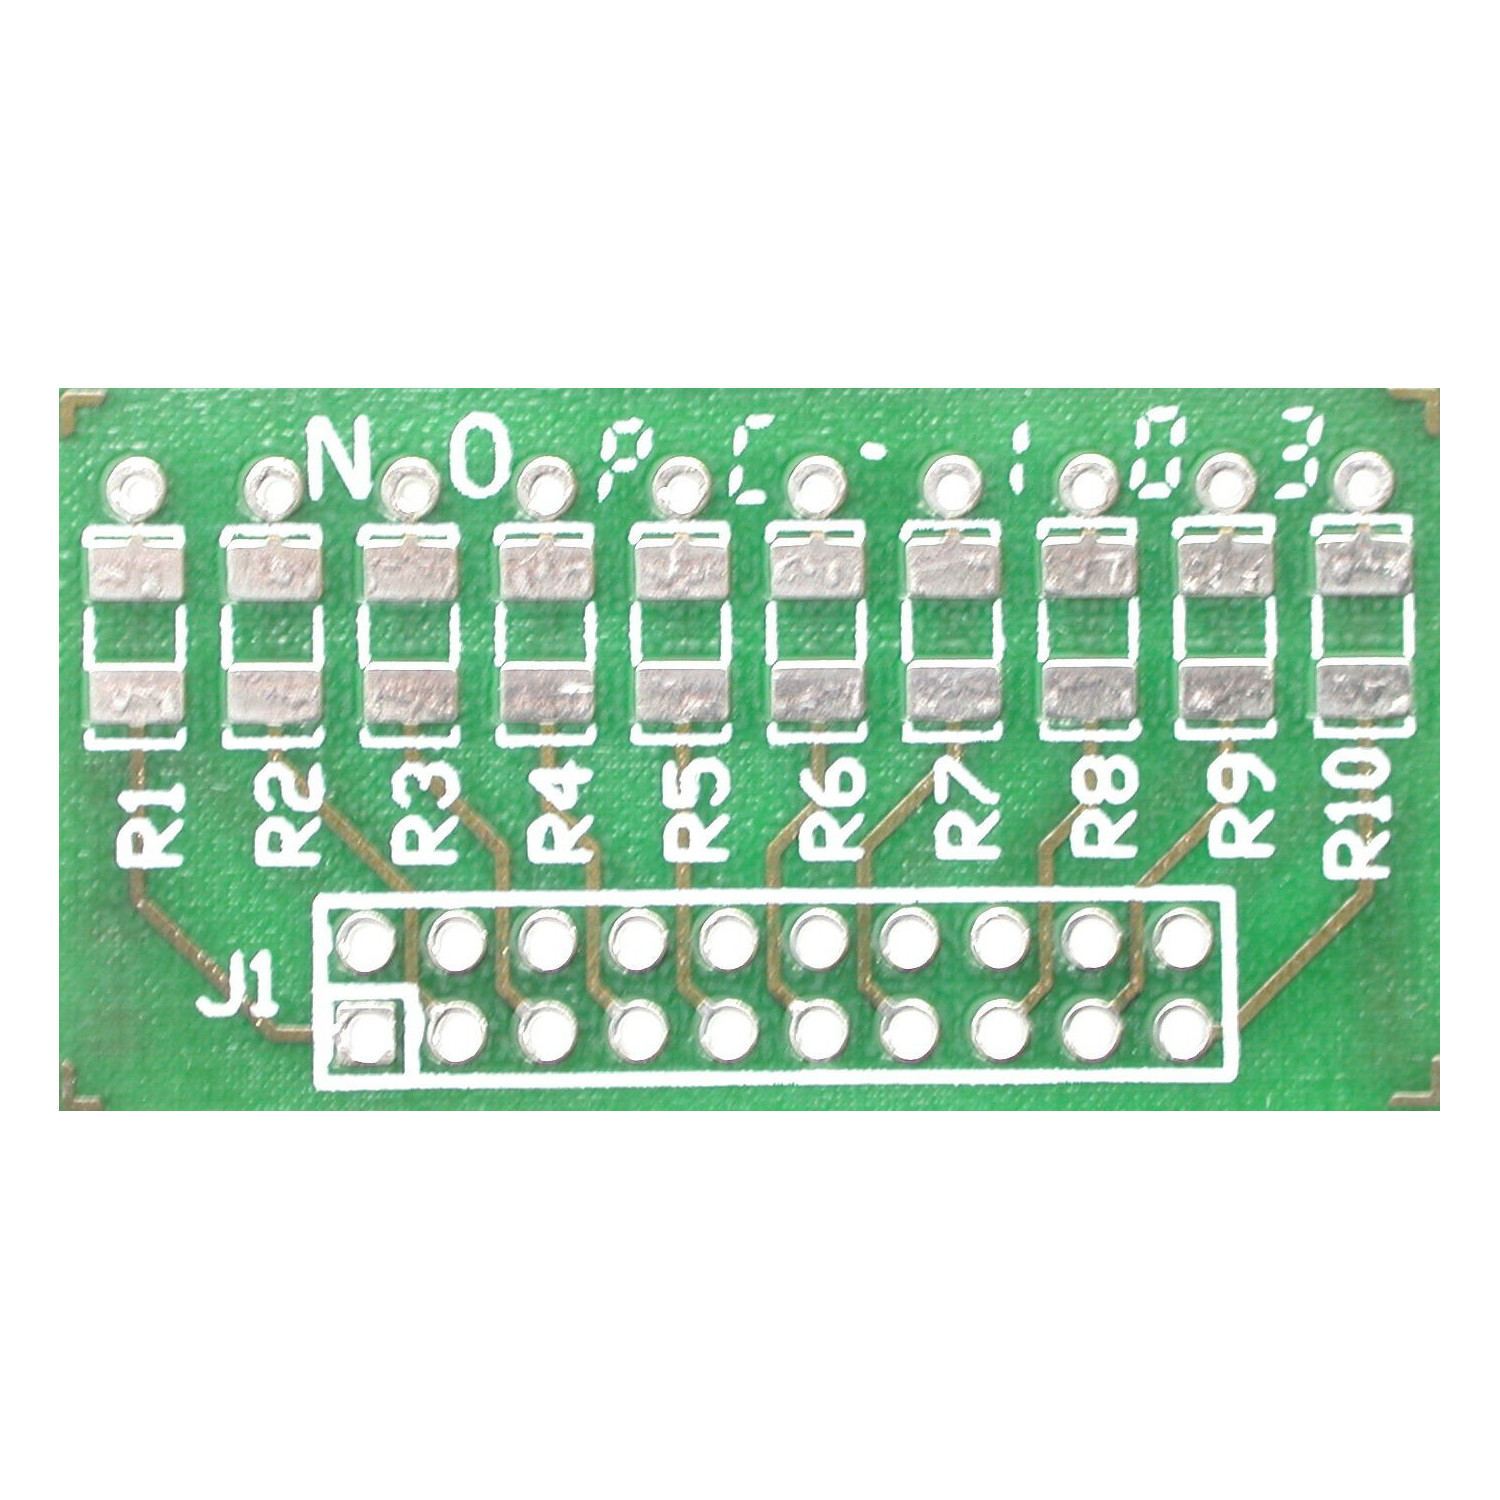 SYNTAX PROTOTYPING BOARD